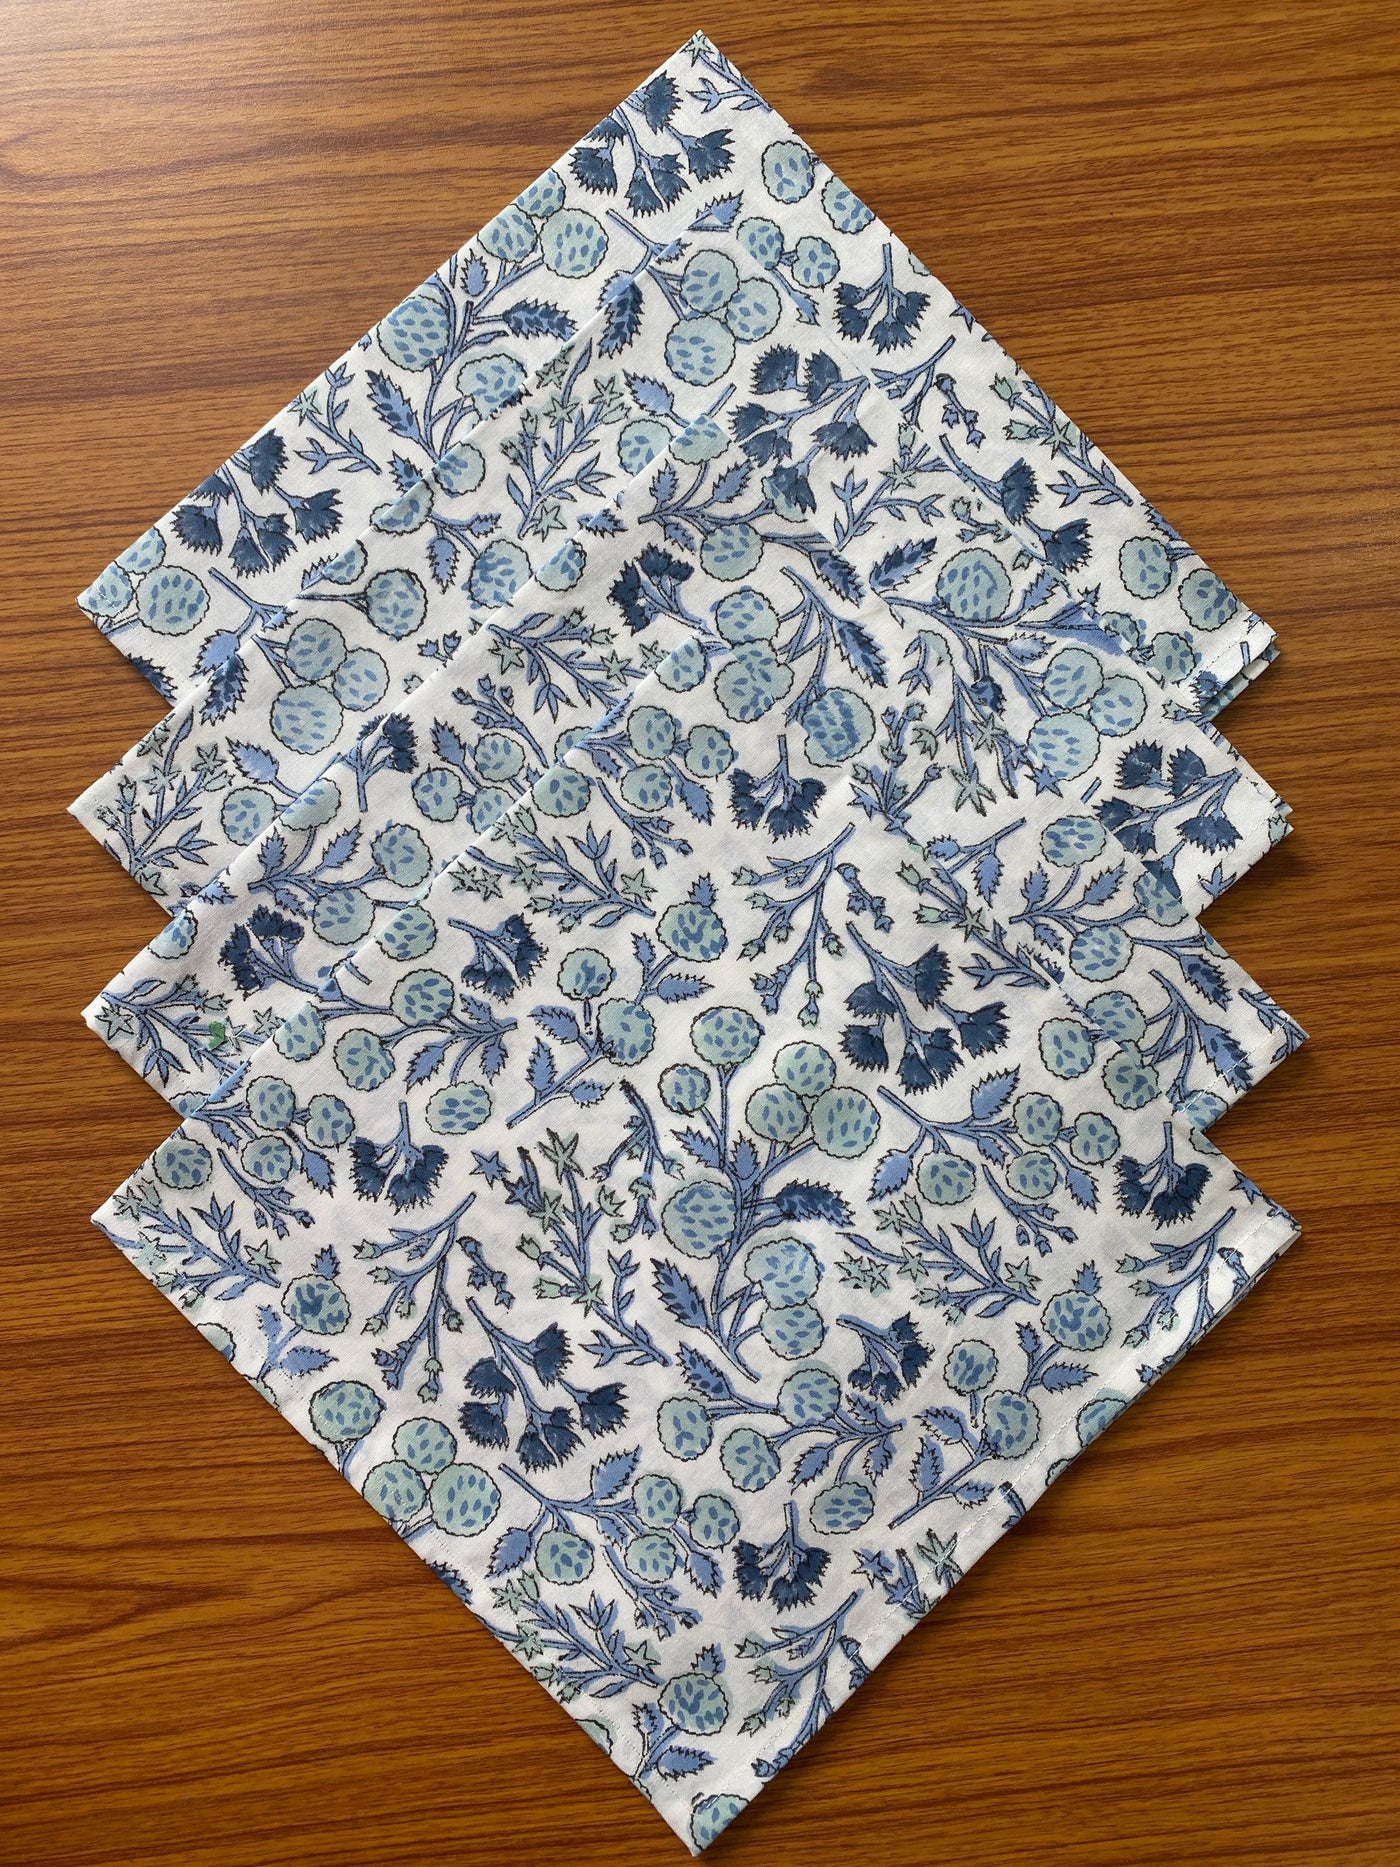 Denim and Baby Blue on White Indian Hand Block Floral Printed 100% Pure Cotton Cloth Napkins, 18x18"- Cocktail Napkins, 20x20"- Dinner Napkins